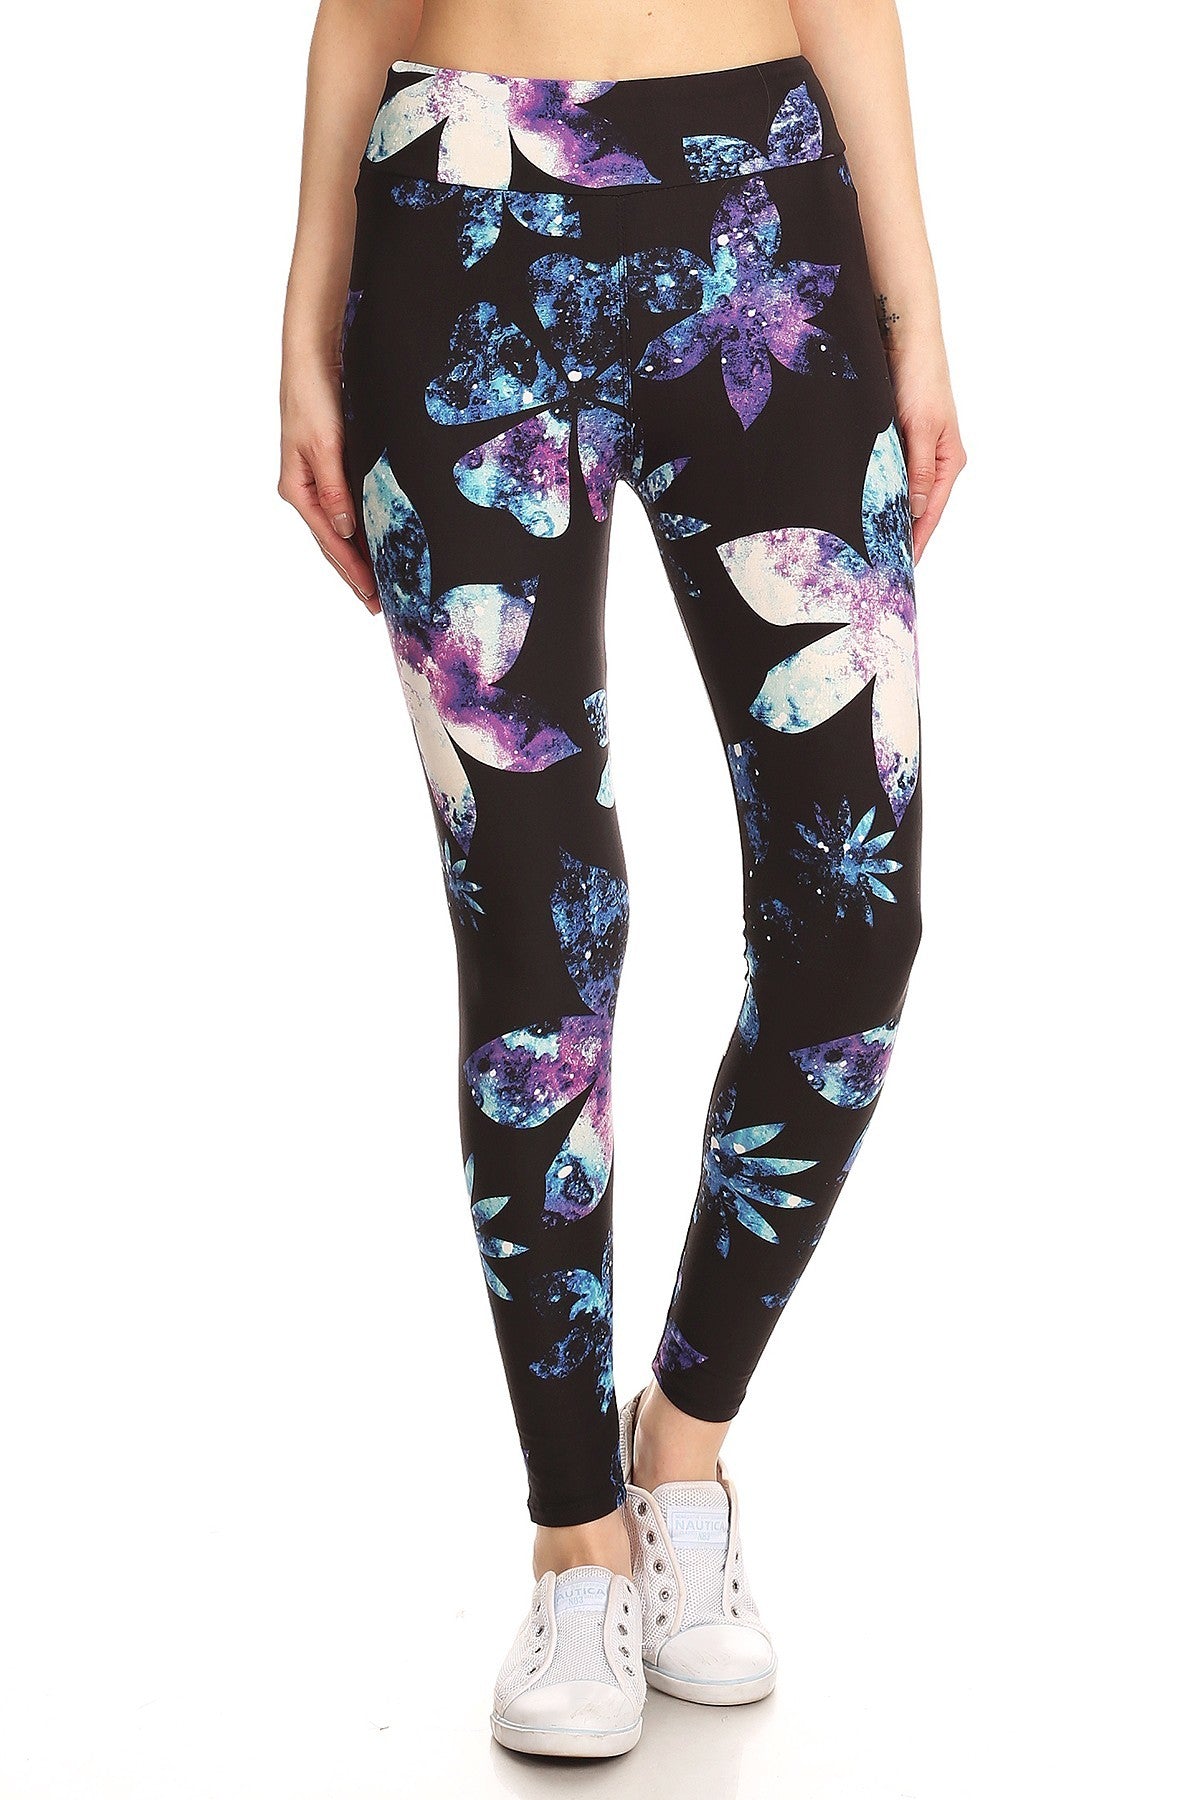 Yoga Style Banded Lined Galaxy Silhouette Floral Print, Full Length Leggings In A Slim Fitting Style With A Banded High Waist - Tigbul's Fashion